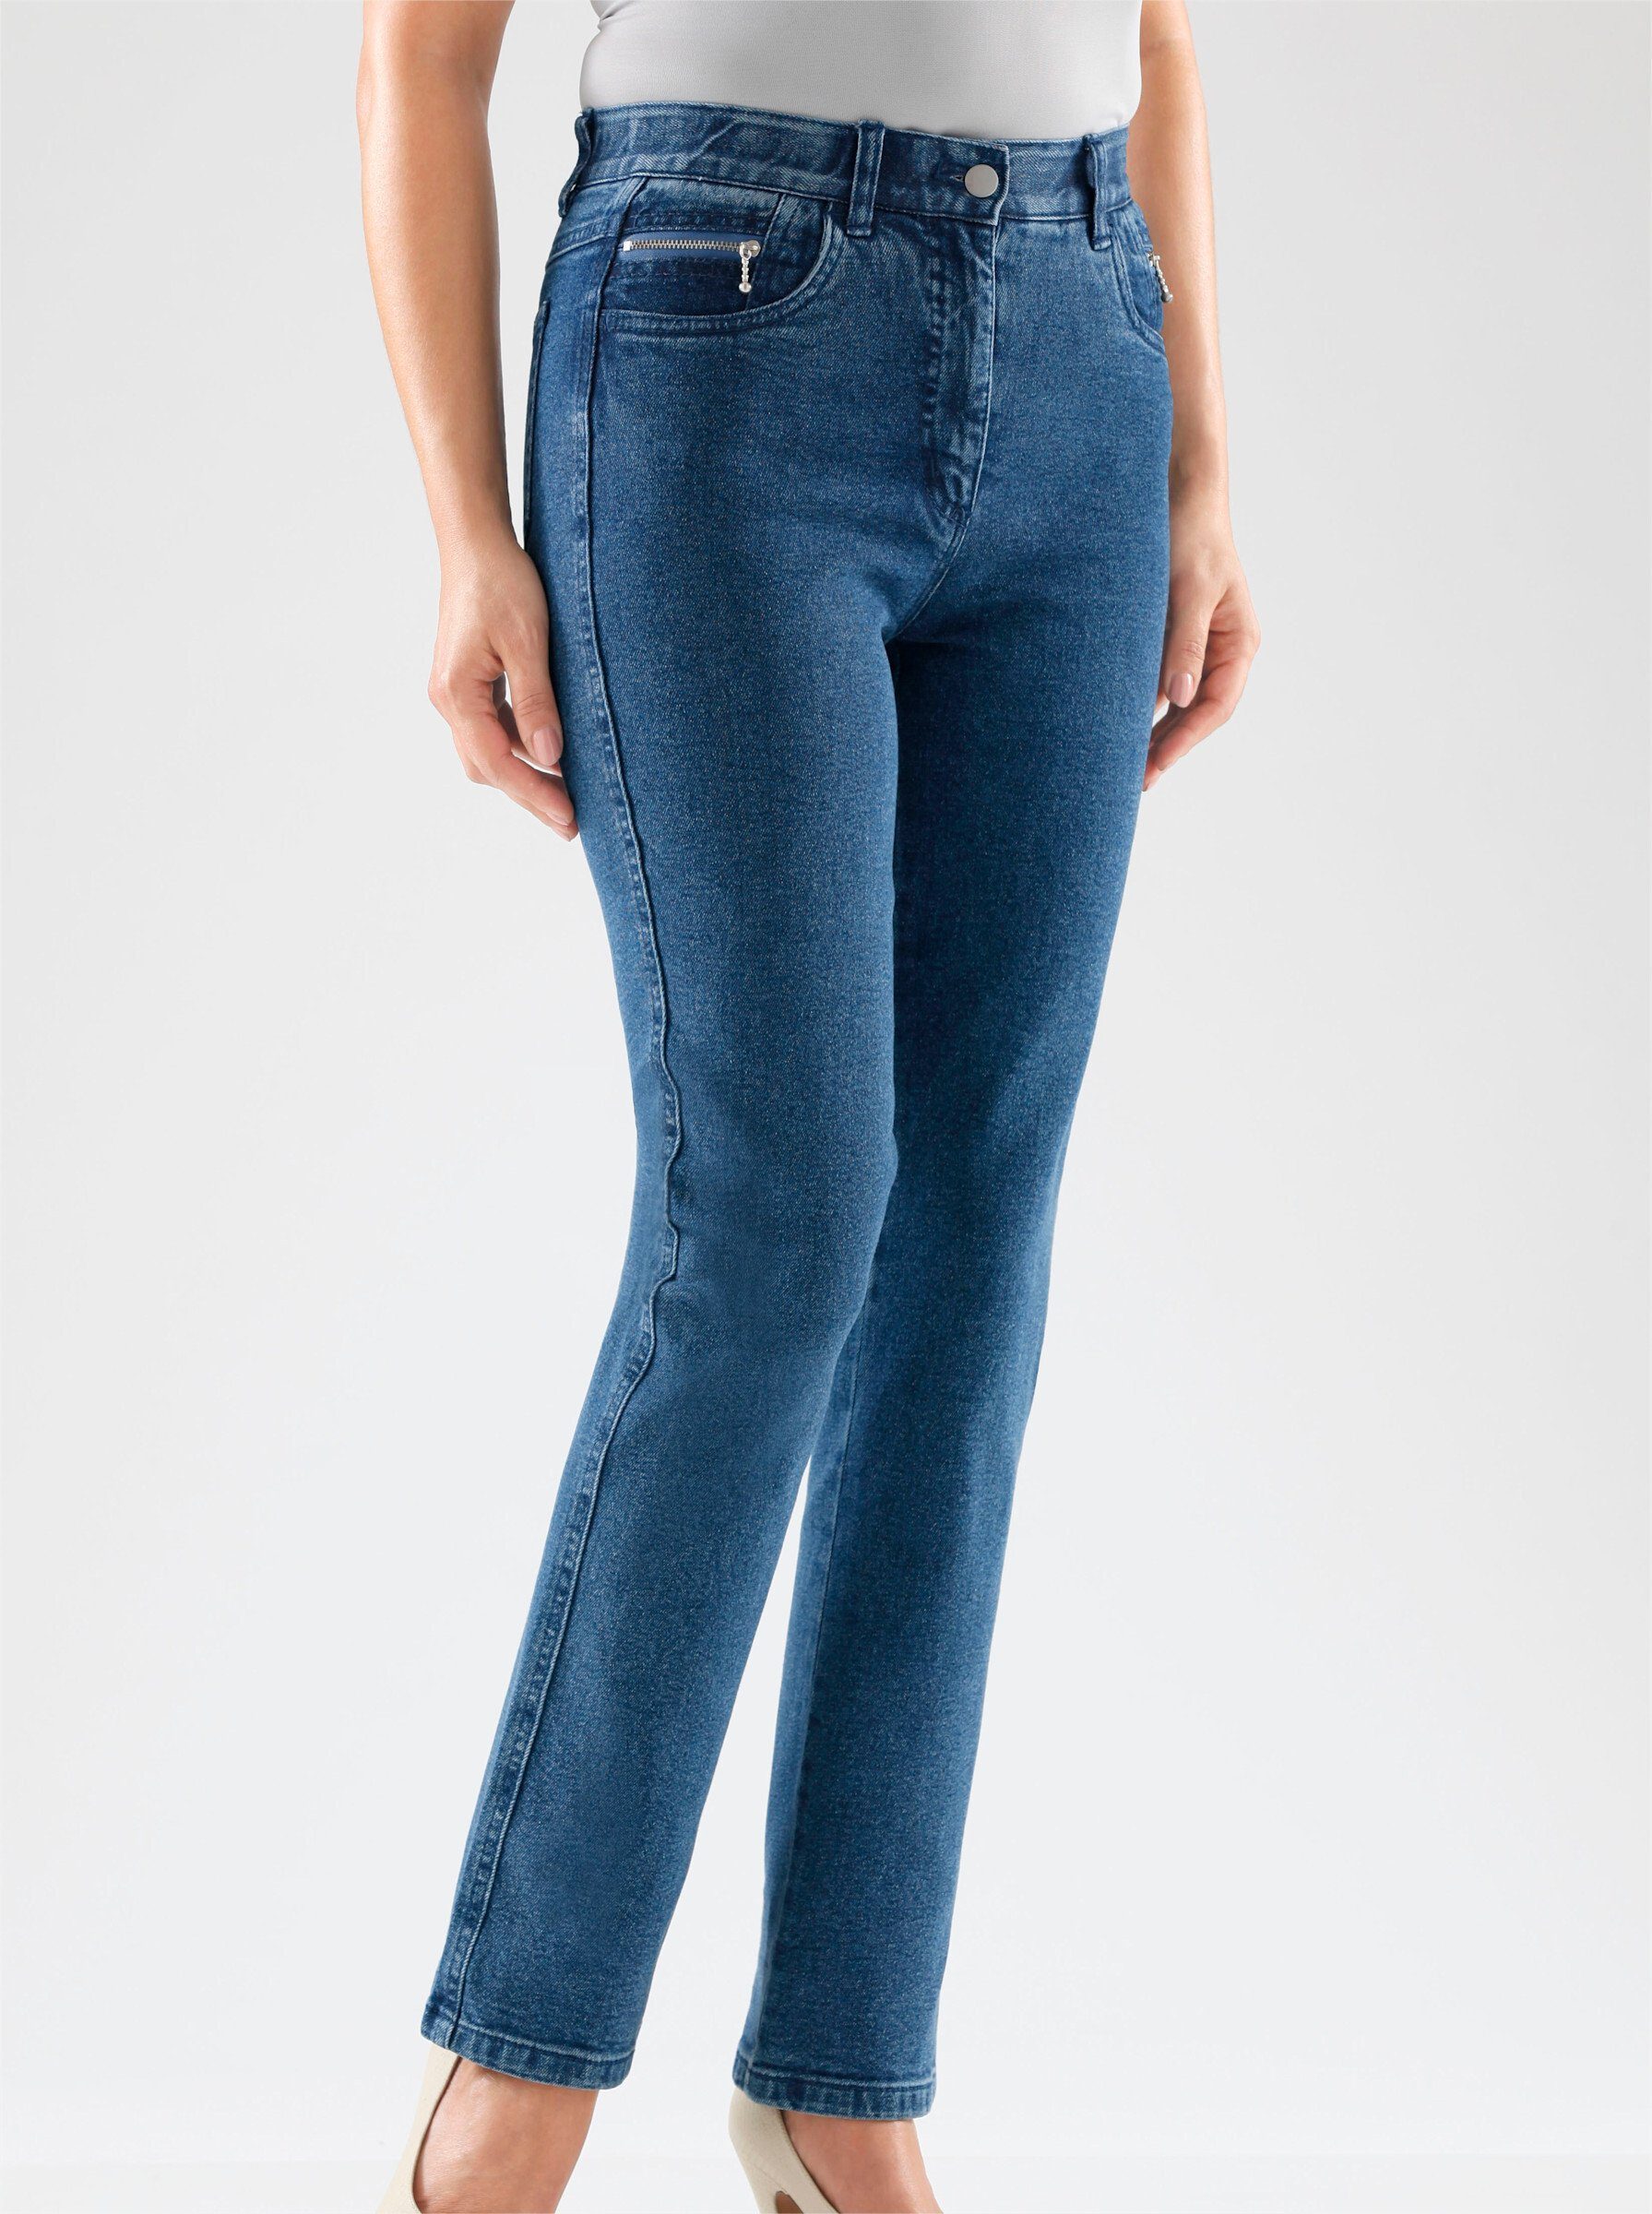 WITT WEIDEN Bequeme Jeans blue-stone-washed | Straight-Fit Jeans